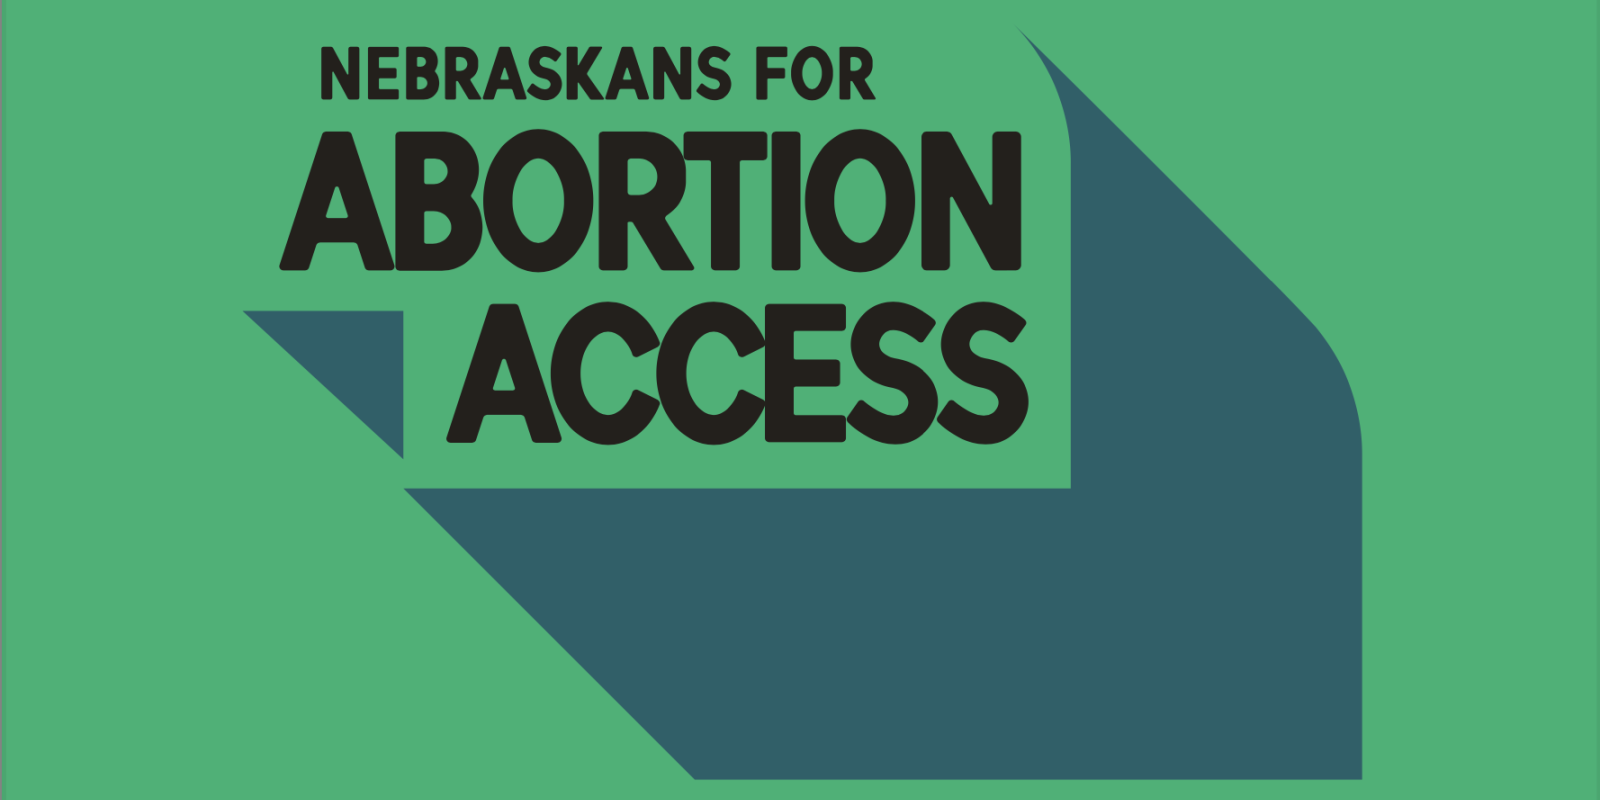 Nebraskans for Abortion Access logo with black text and a green background